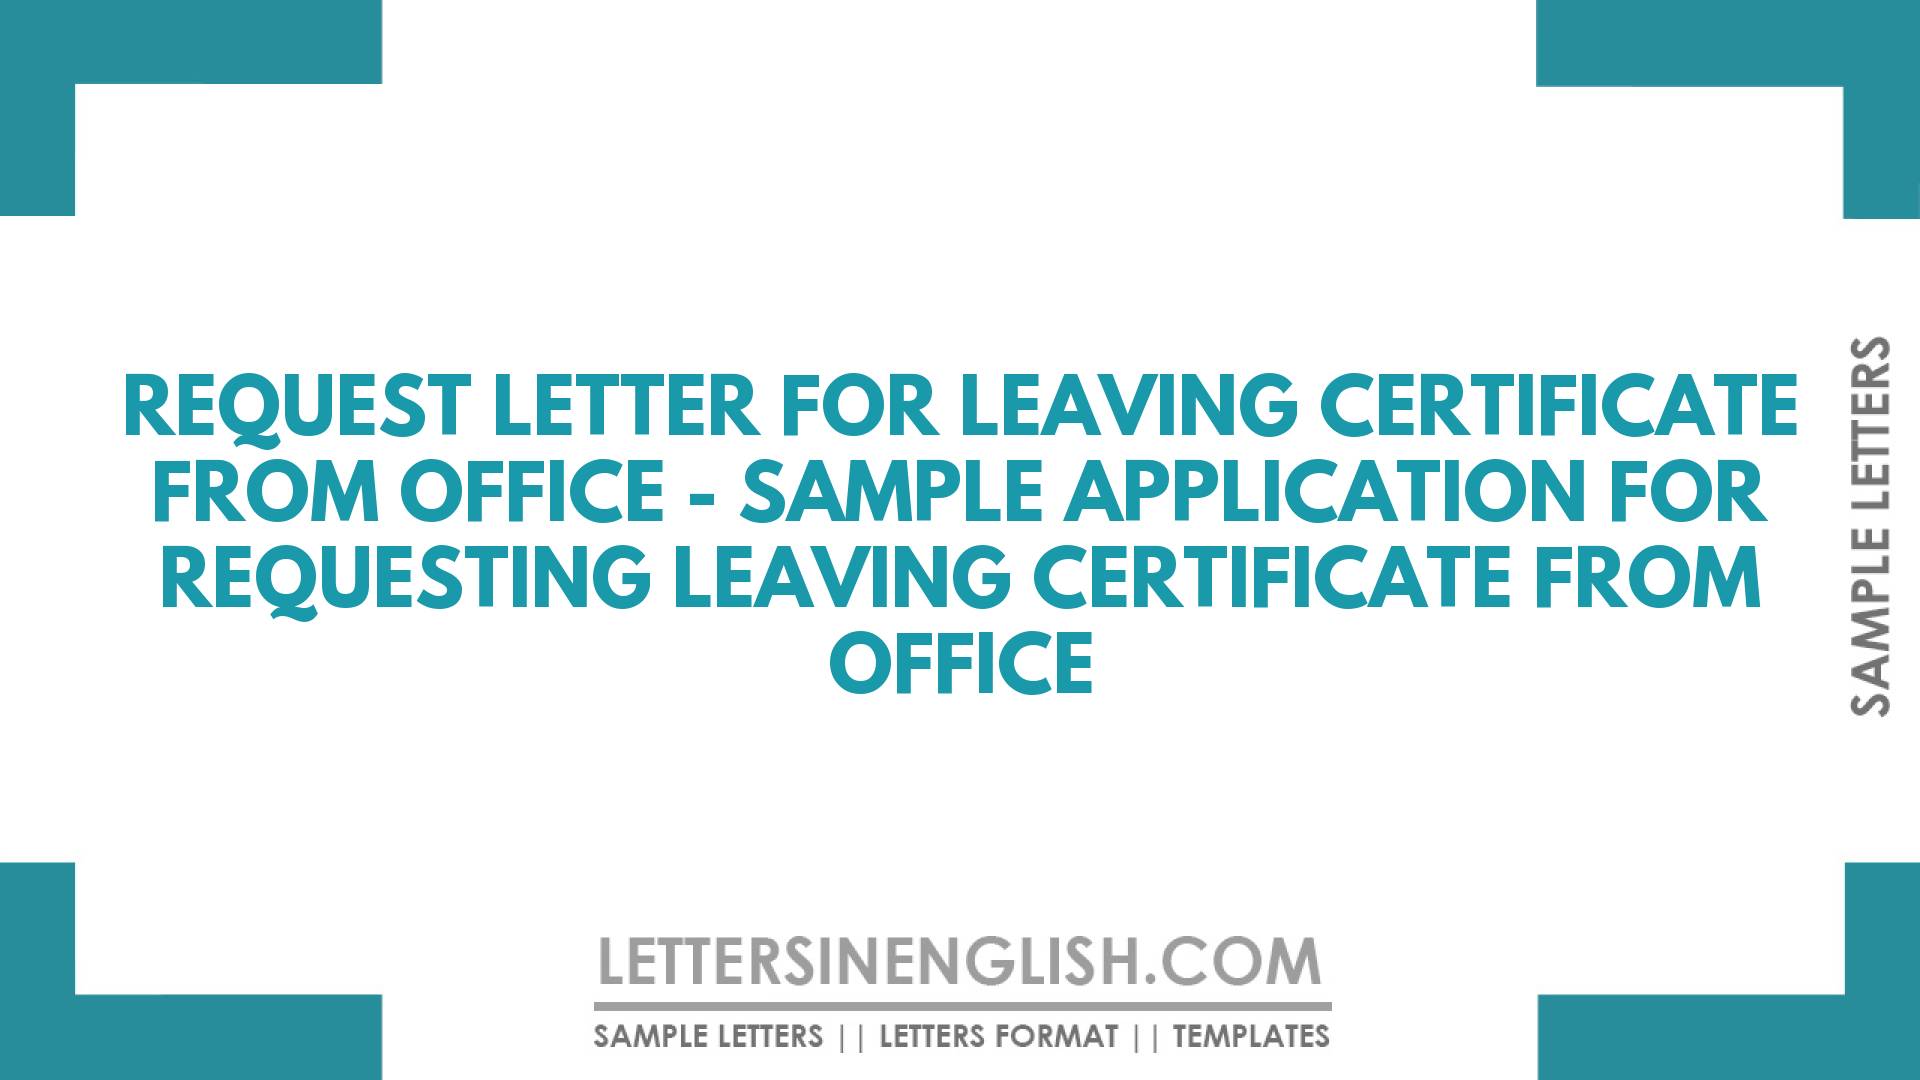 how to write application letter for leaving certificate